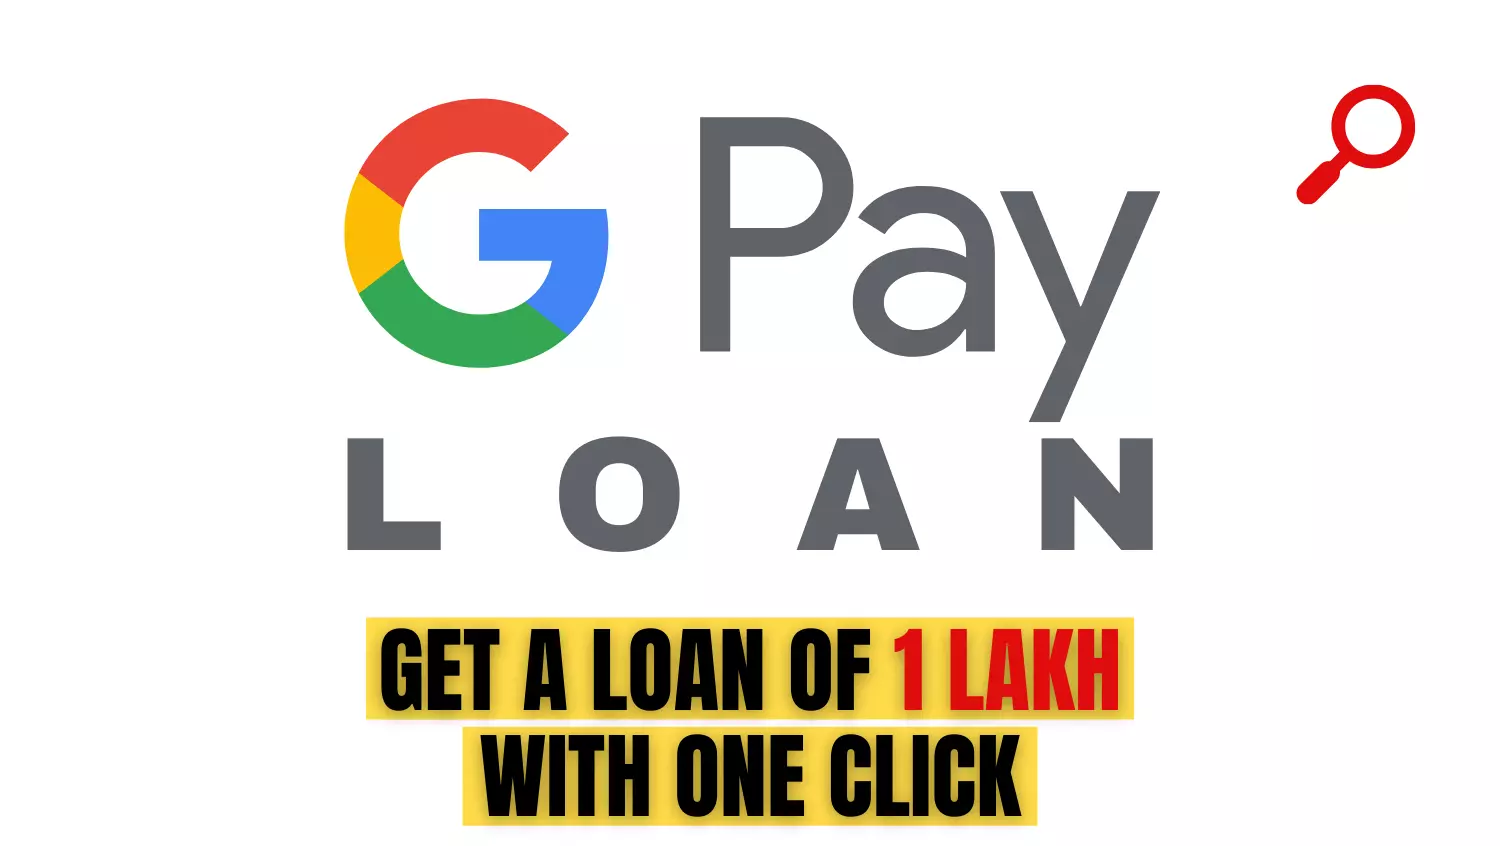 Google Pay loan service for Google Pay users, get a loan of 1 lakh with one click